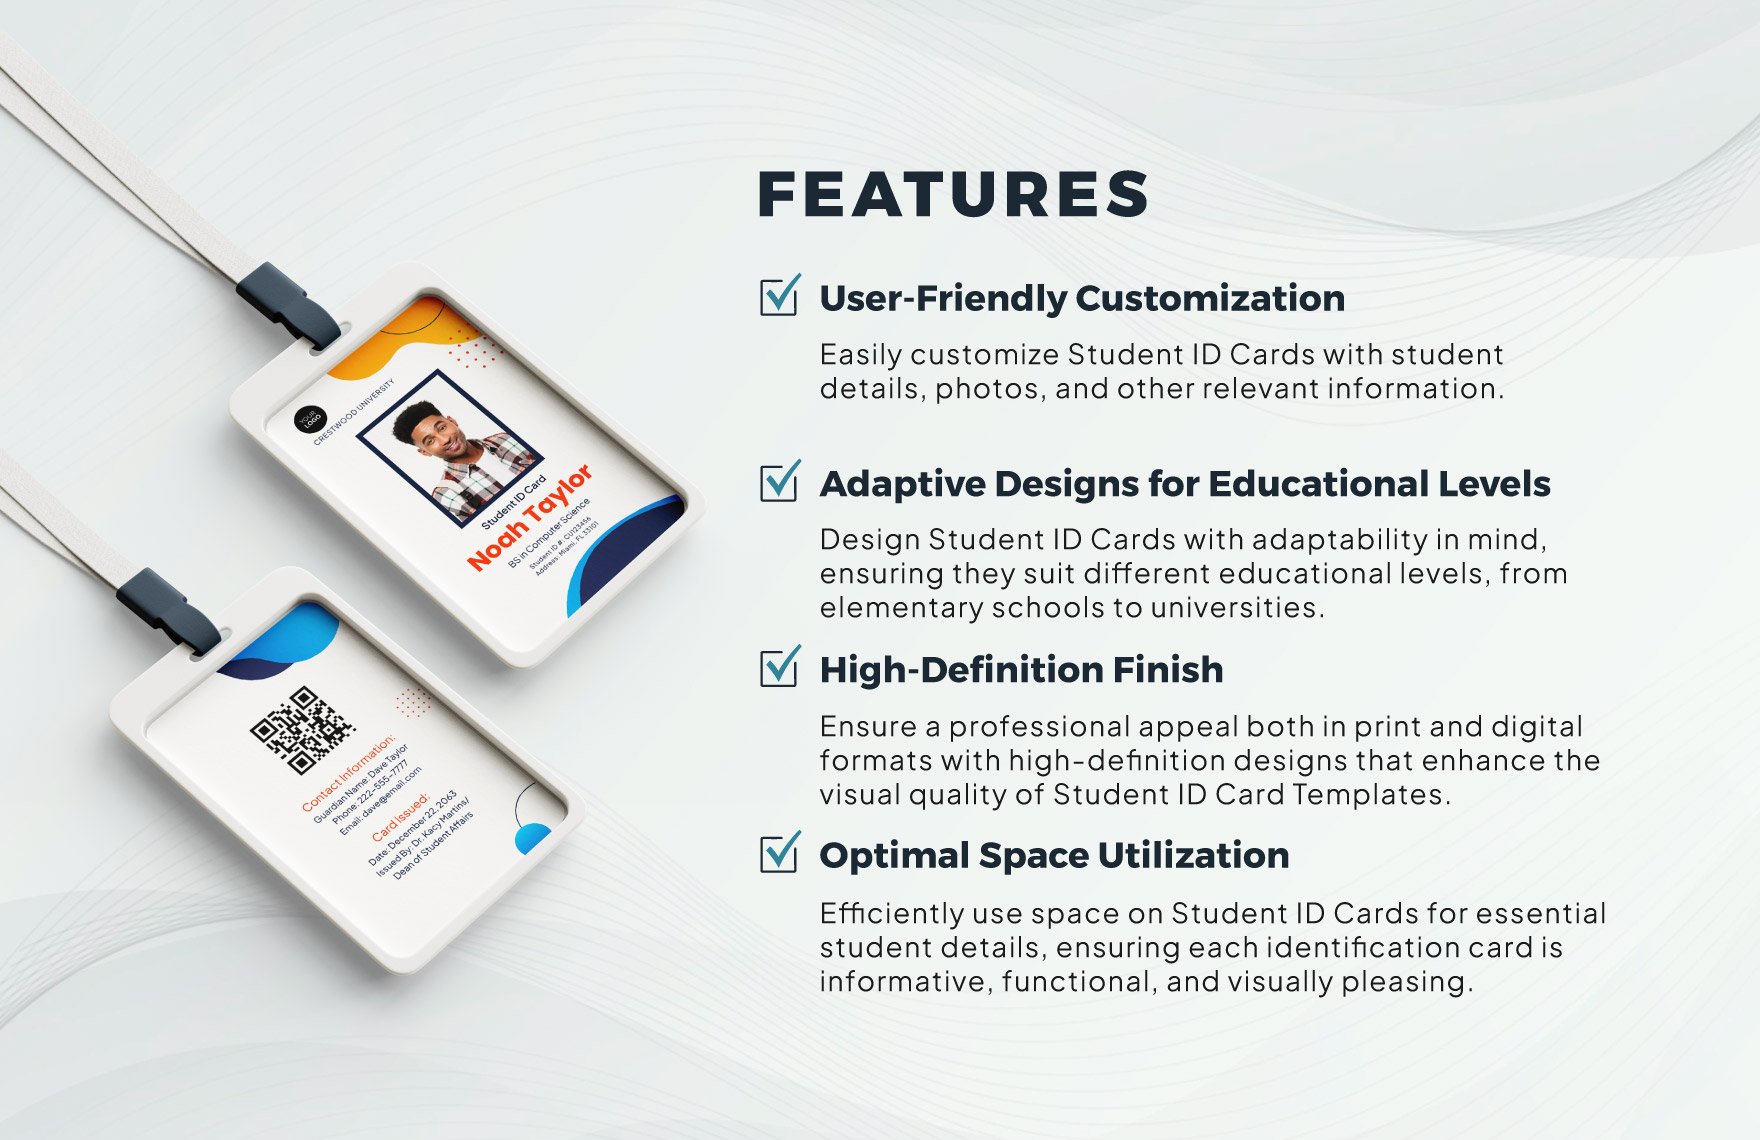 Design Student Id Card Template